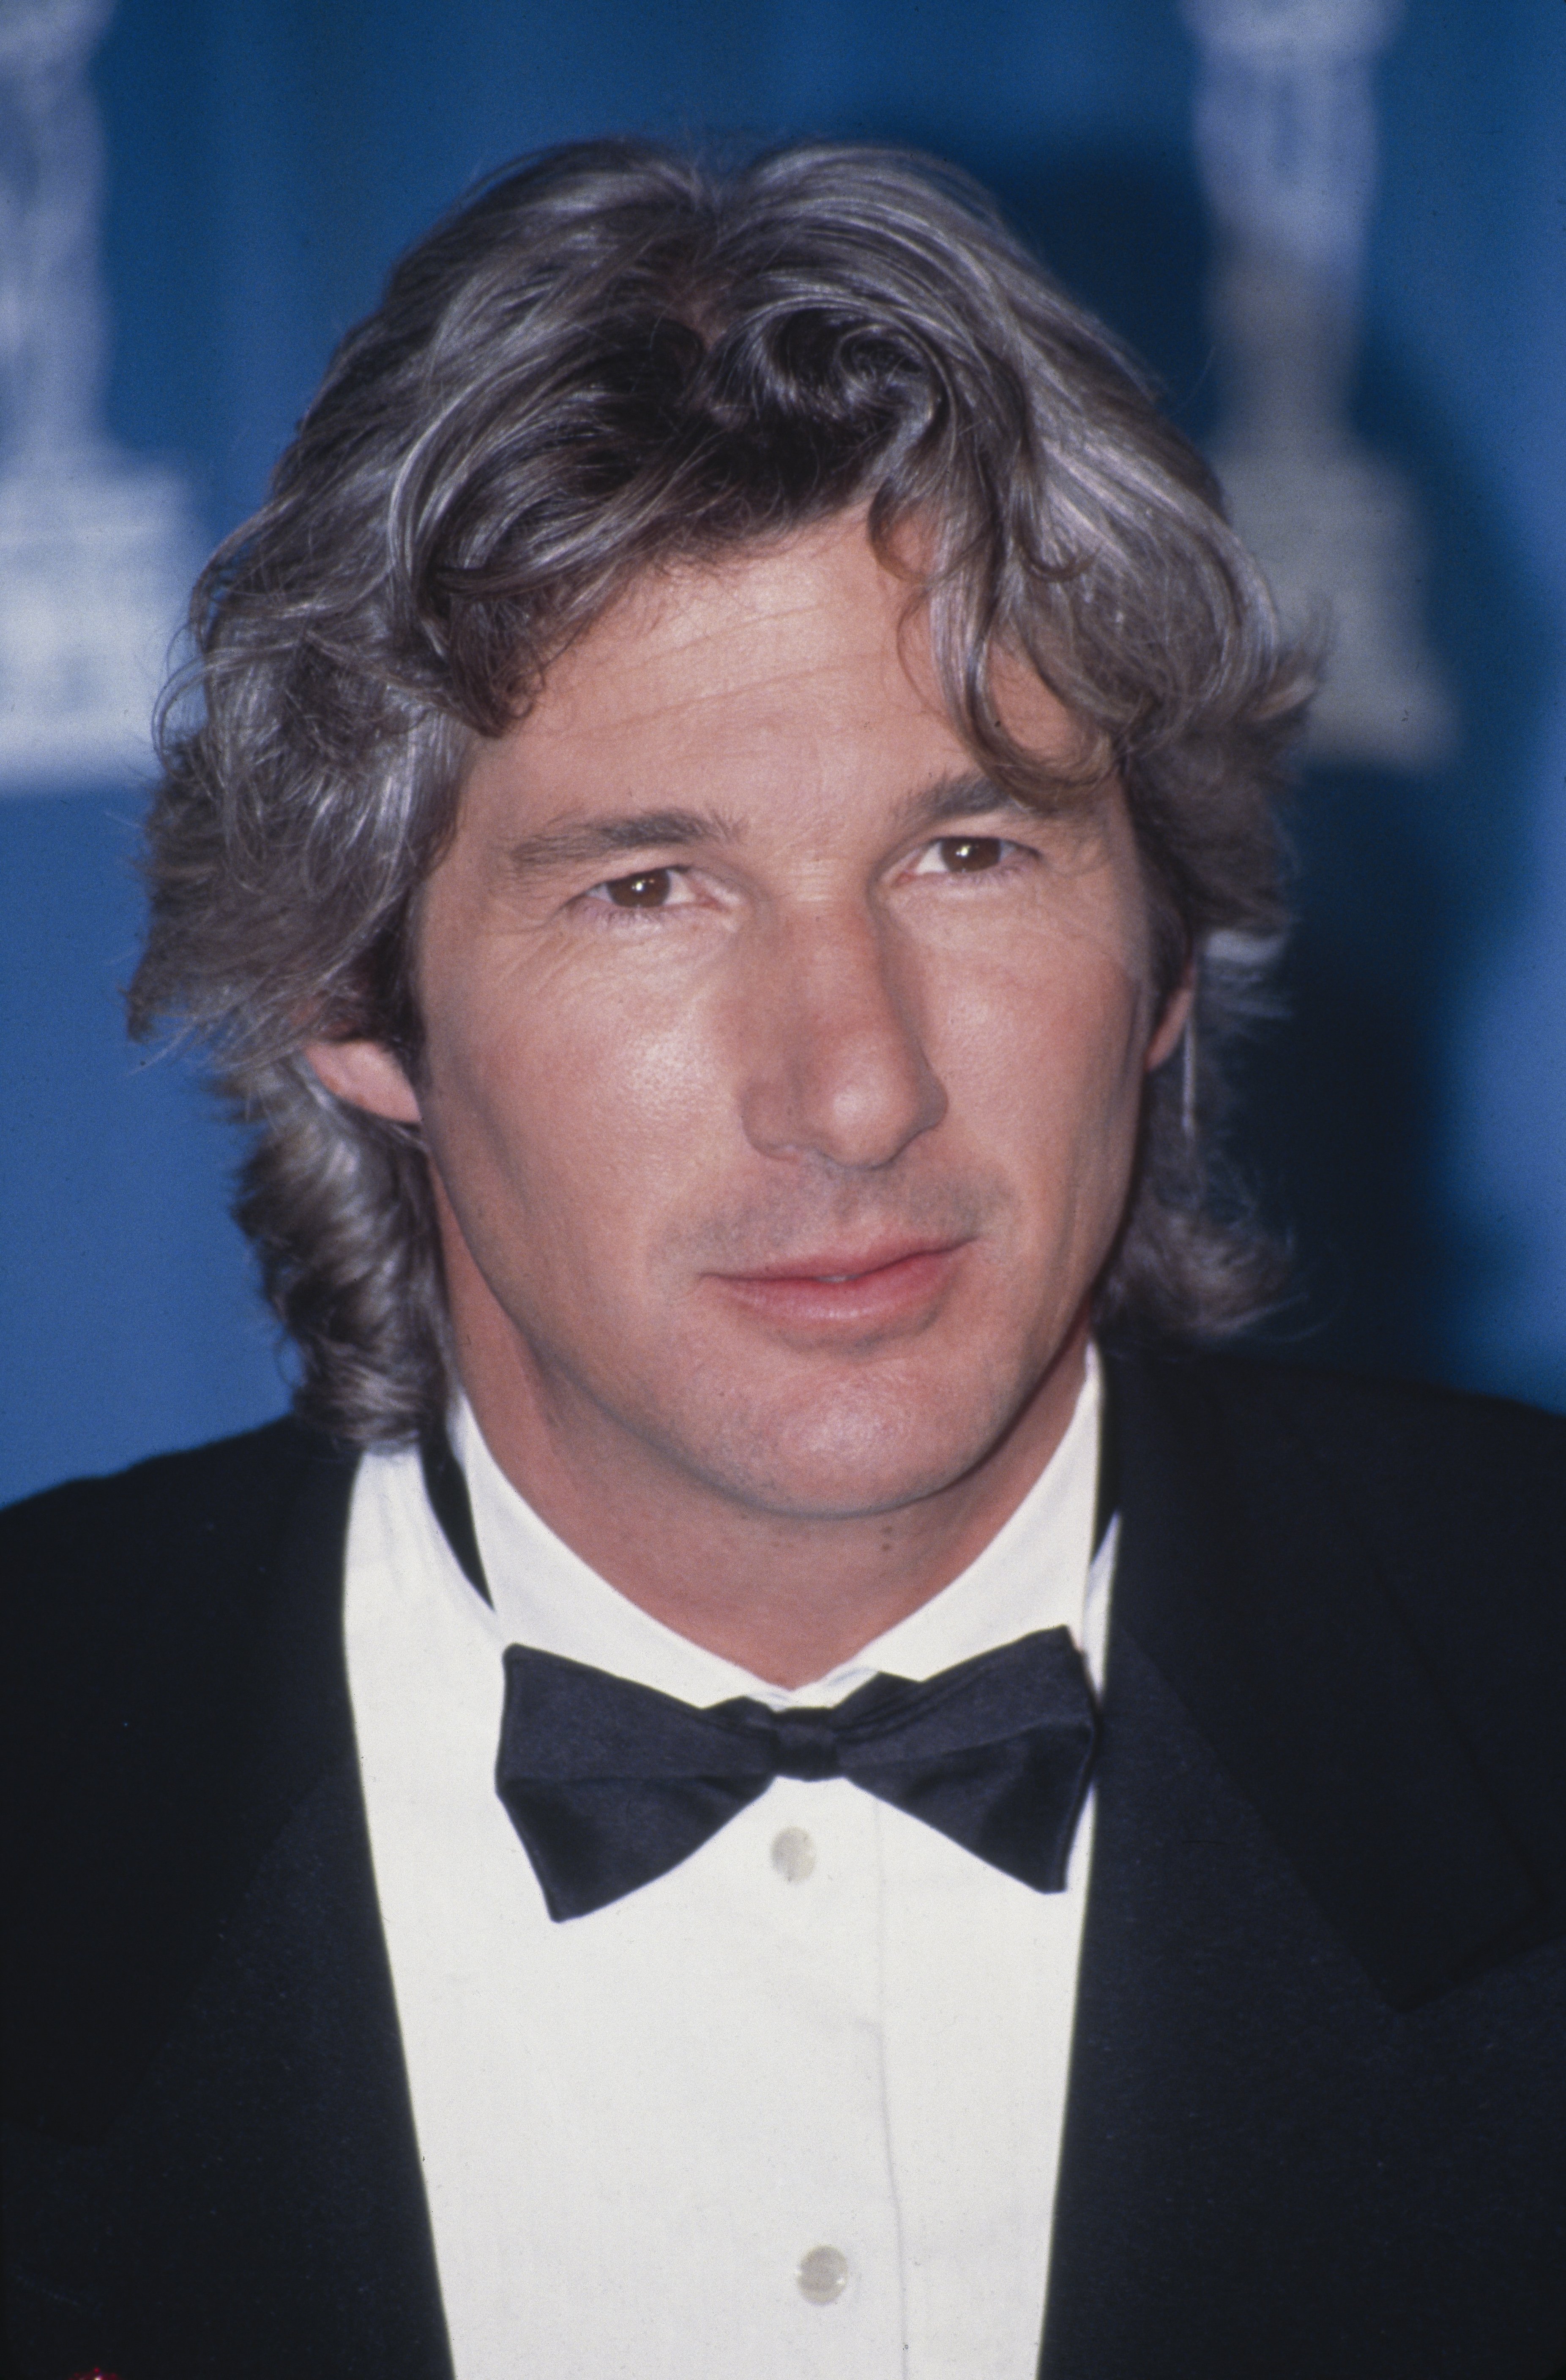 Richard Gere at the 65th Annual Academy Awards in Los Angeles, California, on March 29, 1993. | Source: Getty Images